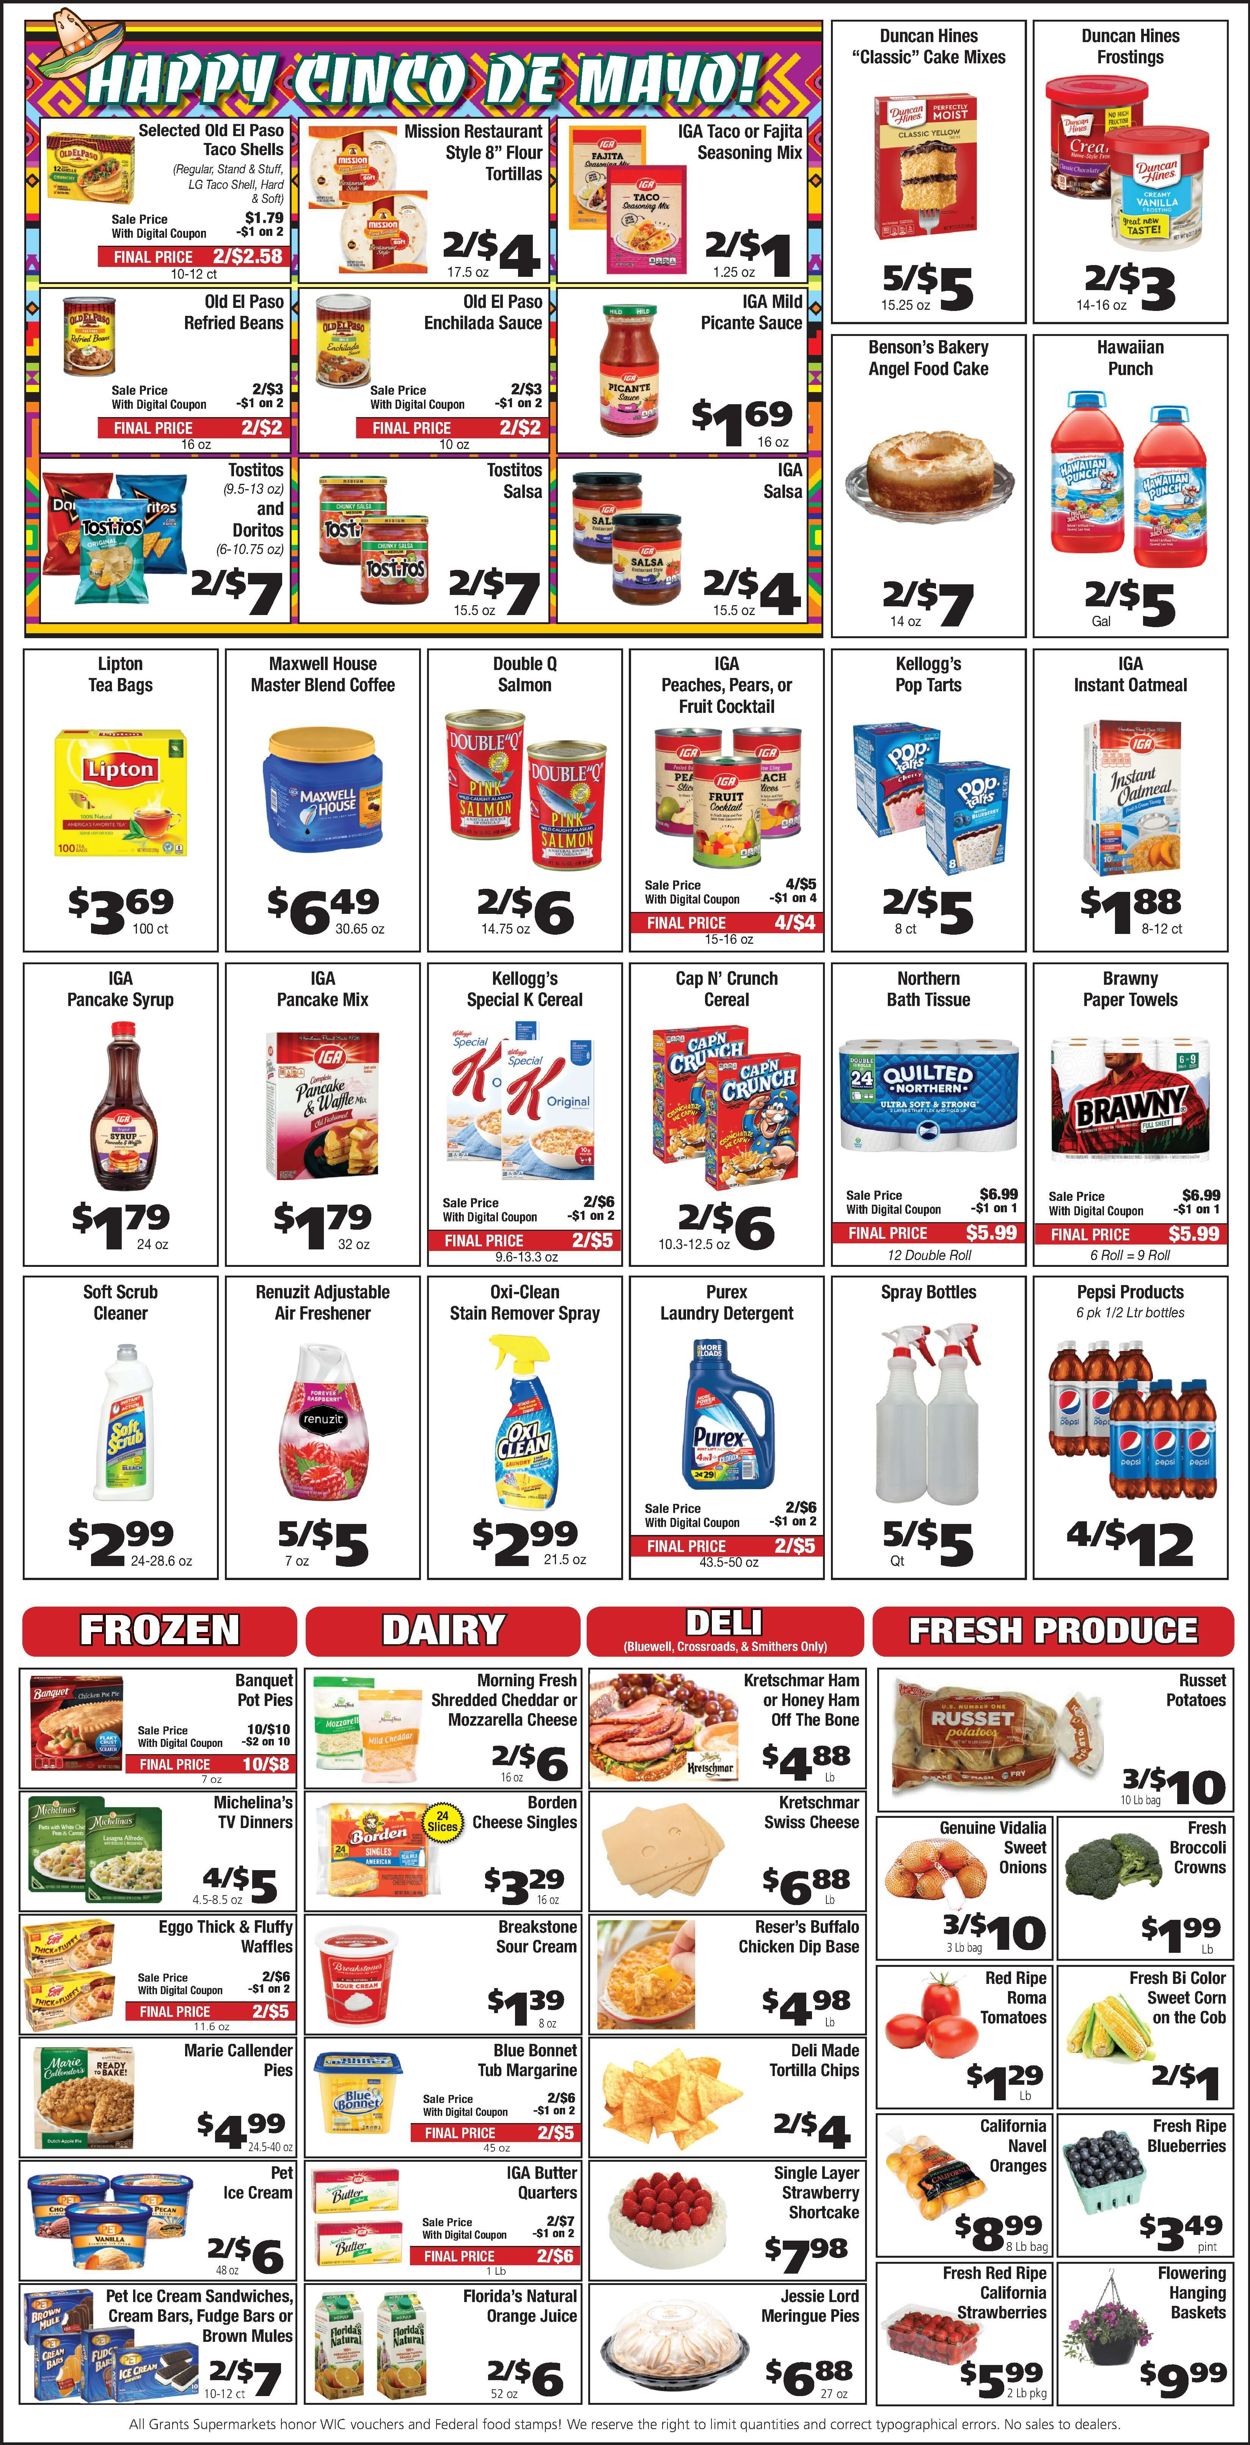 Grant's Supermarket Ad from 05/04/2022